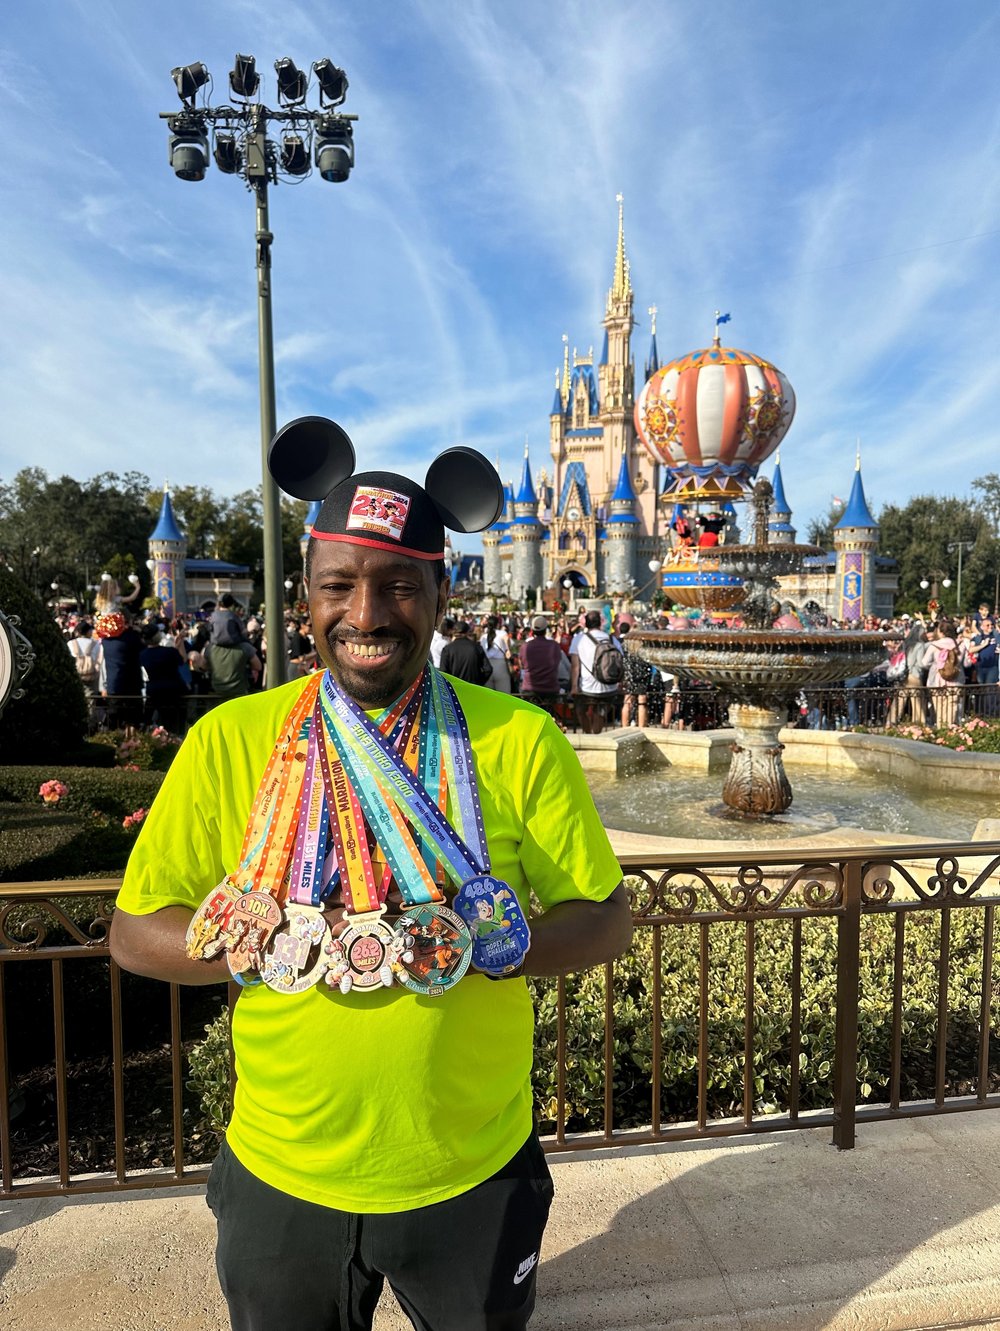  Achilles member smiling in front of the Castle wearing all of his medals from the Dopey Challenge 